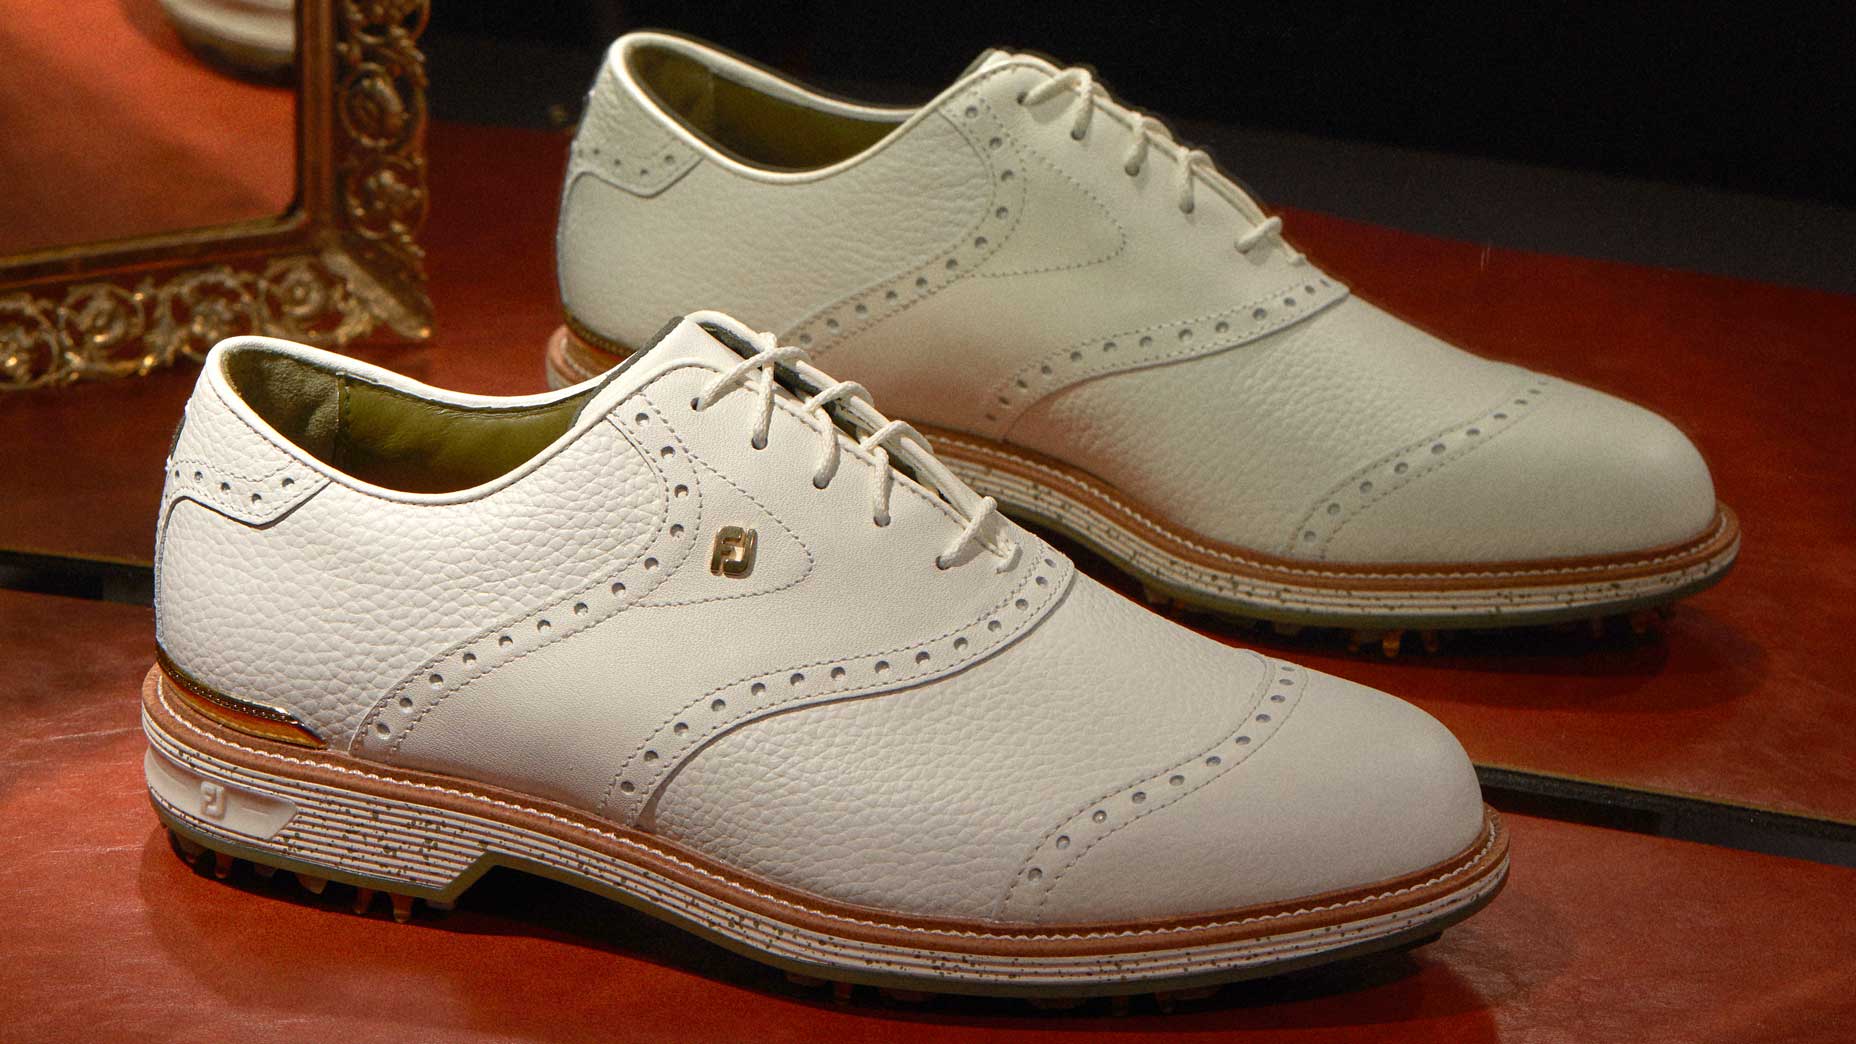 FootJoy teams up with Jon Buscemi in latest footwear collaboration